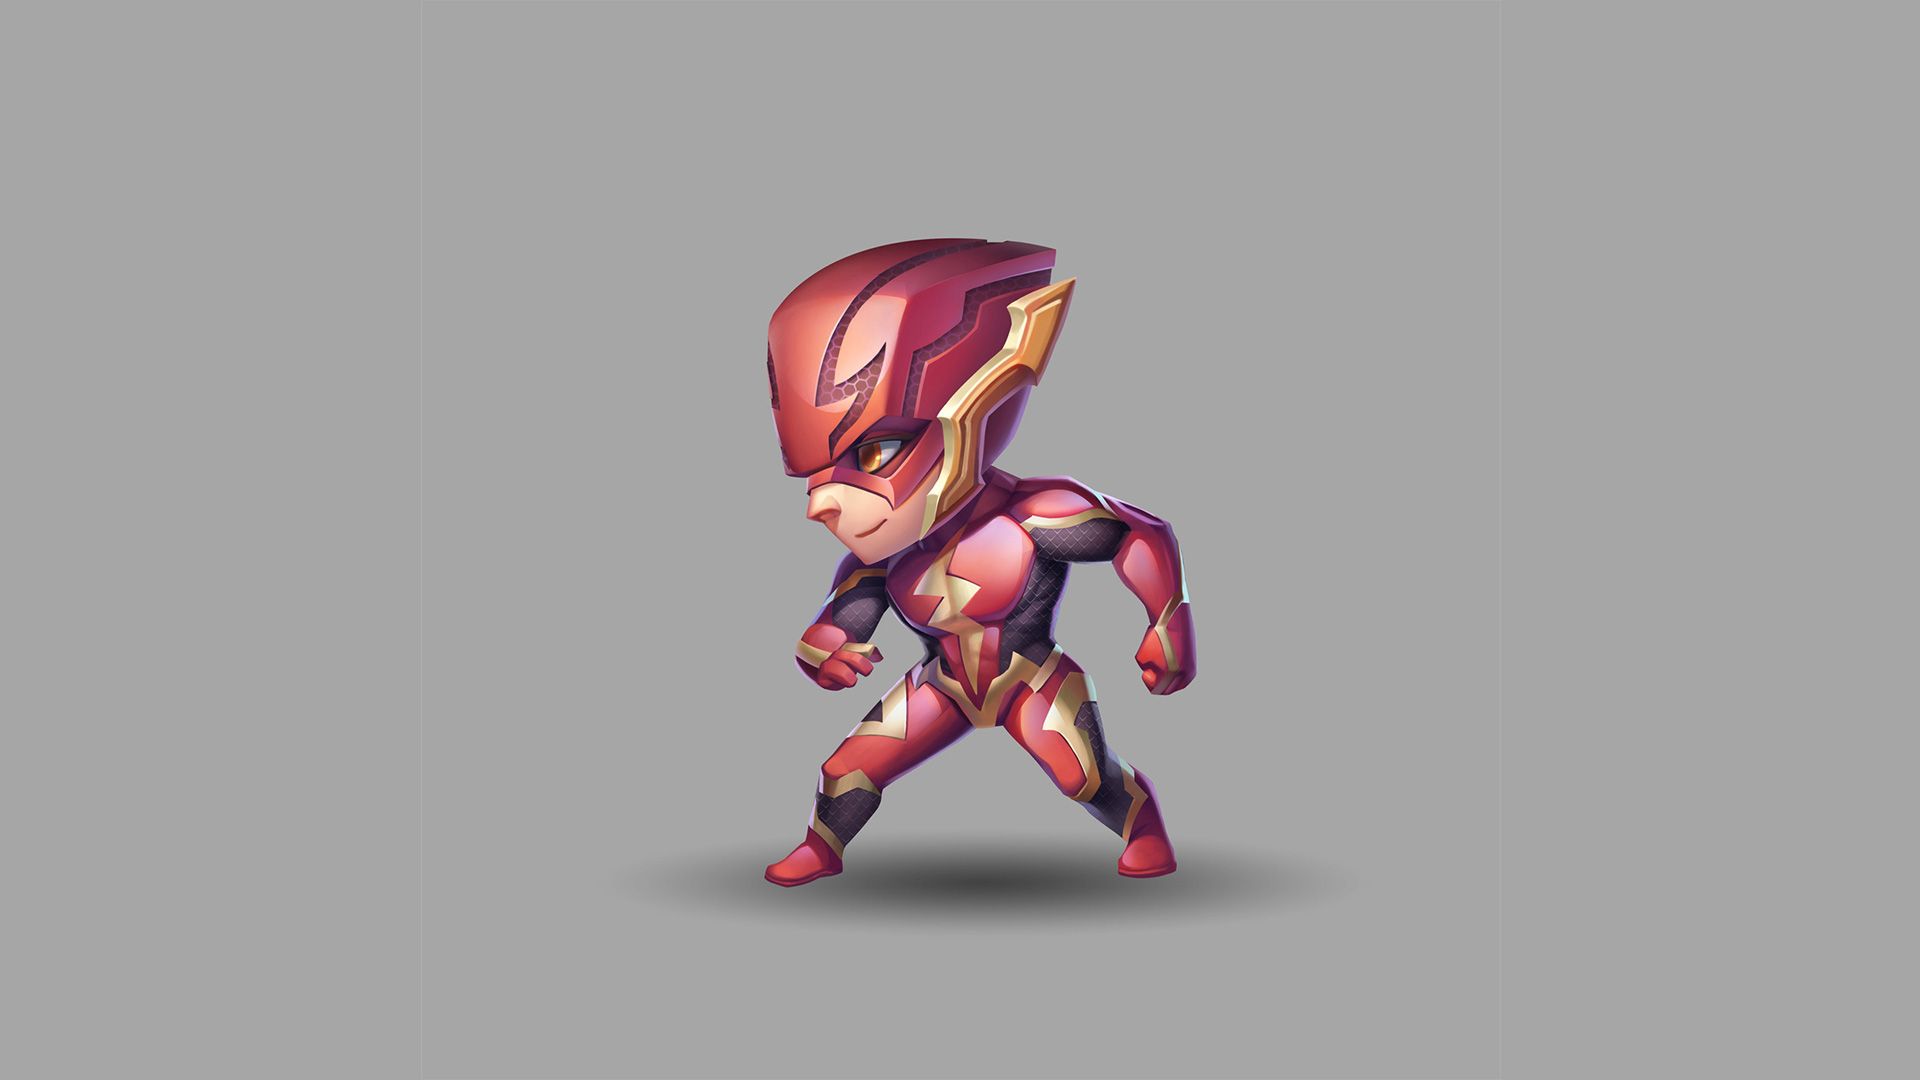 Flash Cute Art, HD Superheroes, 4k Wallpaper, Image, Background, Photo and Picture